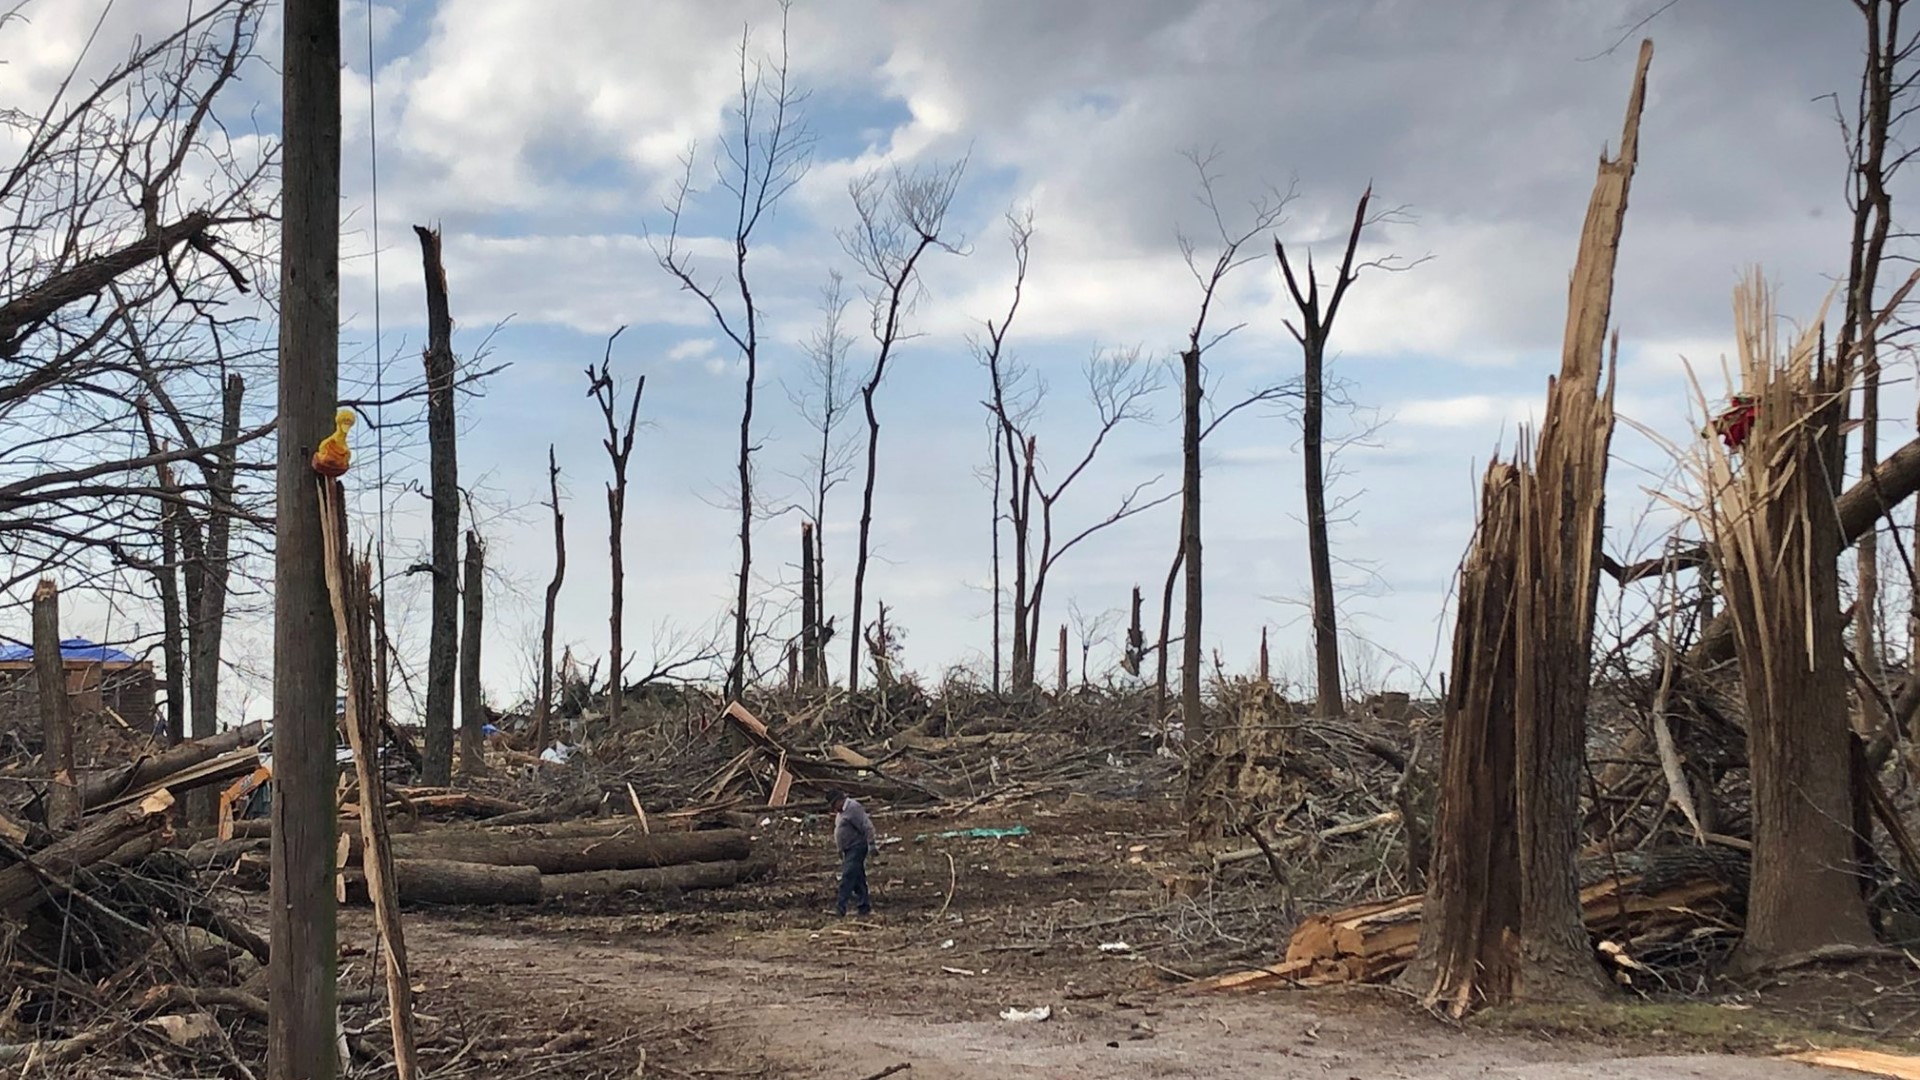 The Kentucky governor said the state will continue to assist smaller communities after tornadoes devastated several towns.